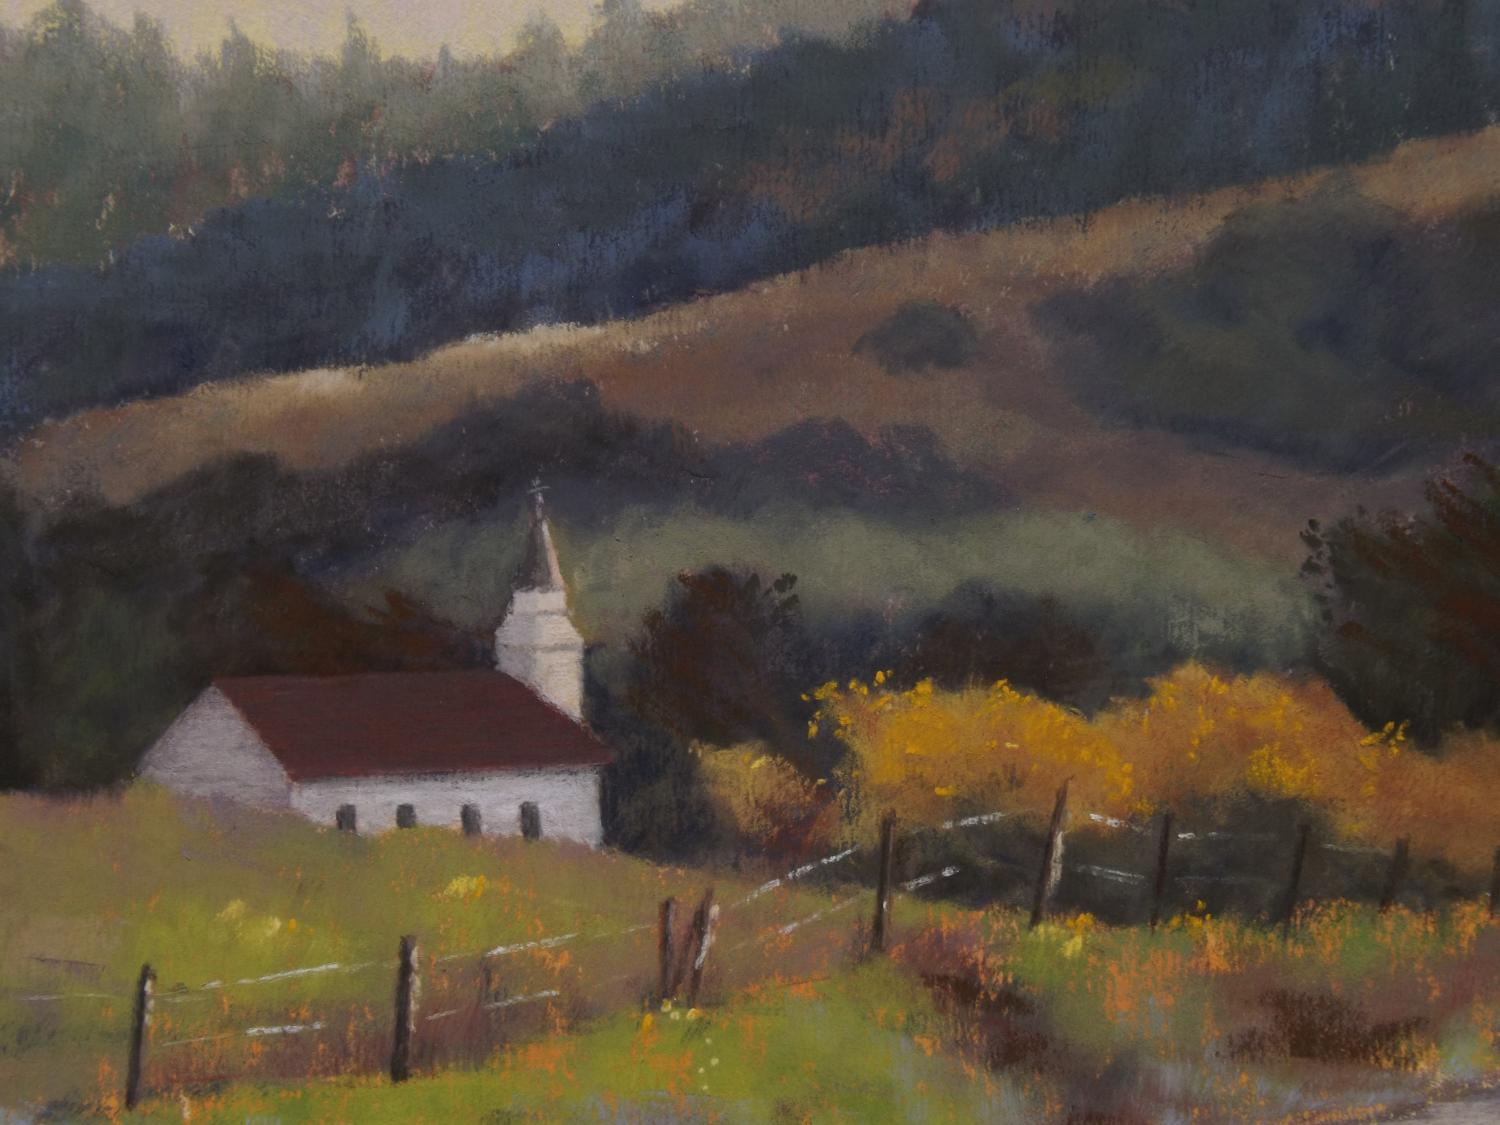 <p>Artist Comments<br>A quiet Northern California morning on a rural road. The marine layer has nearly  burned off, intensifying the colors in the landscape and deepening the shadows. Artist Patricia Prendergast tells us that the Pacific Ocean is